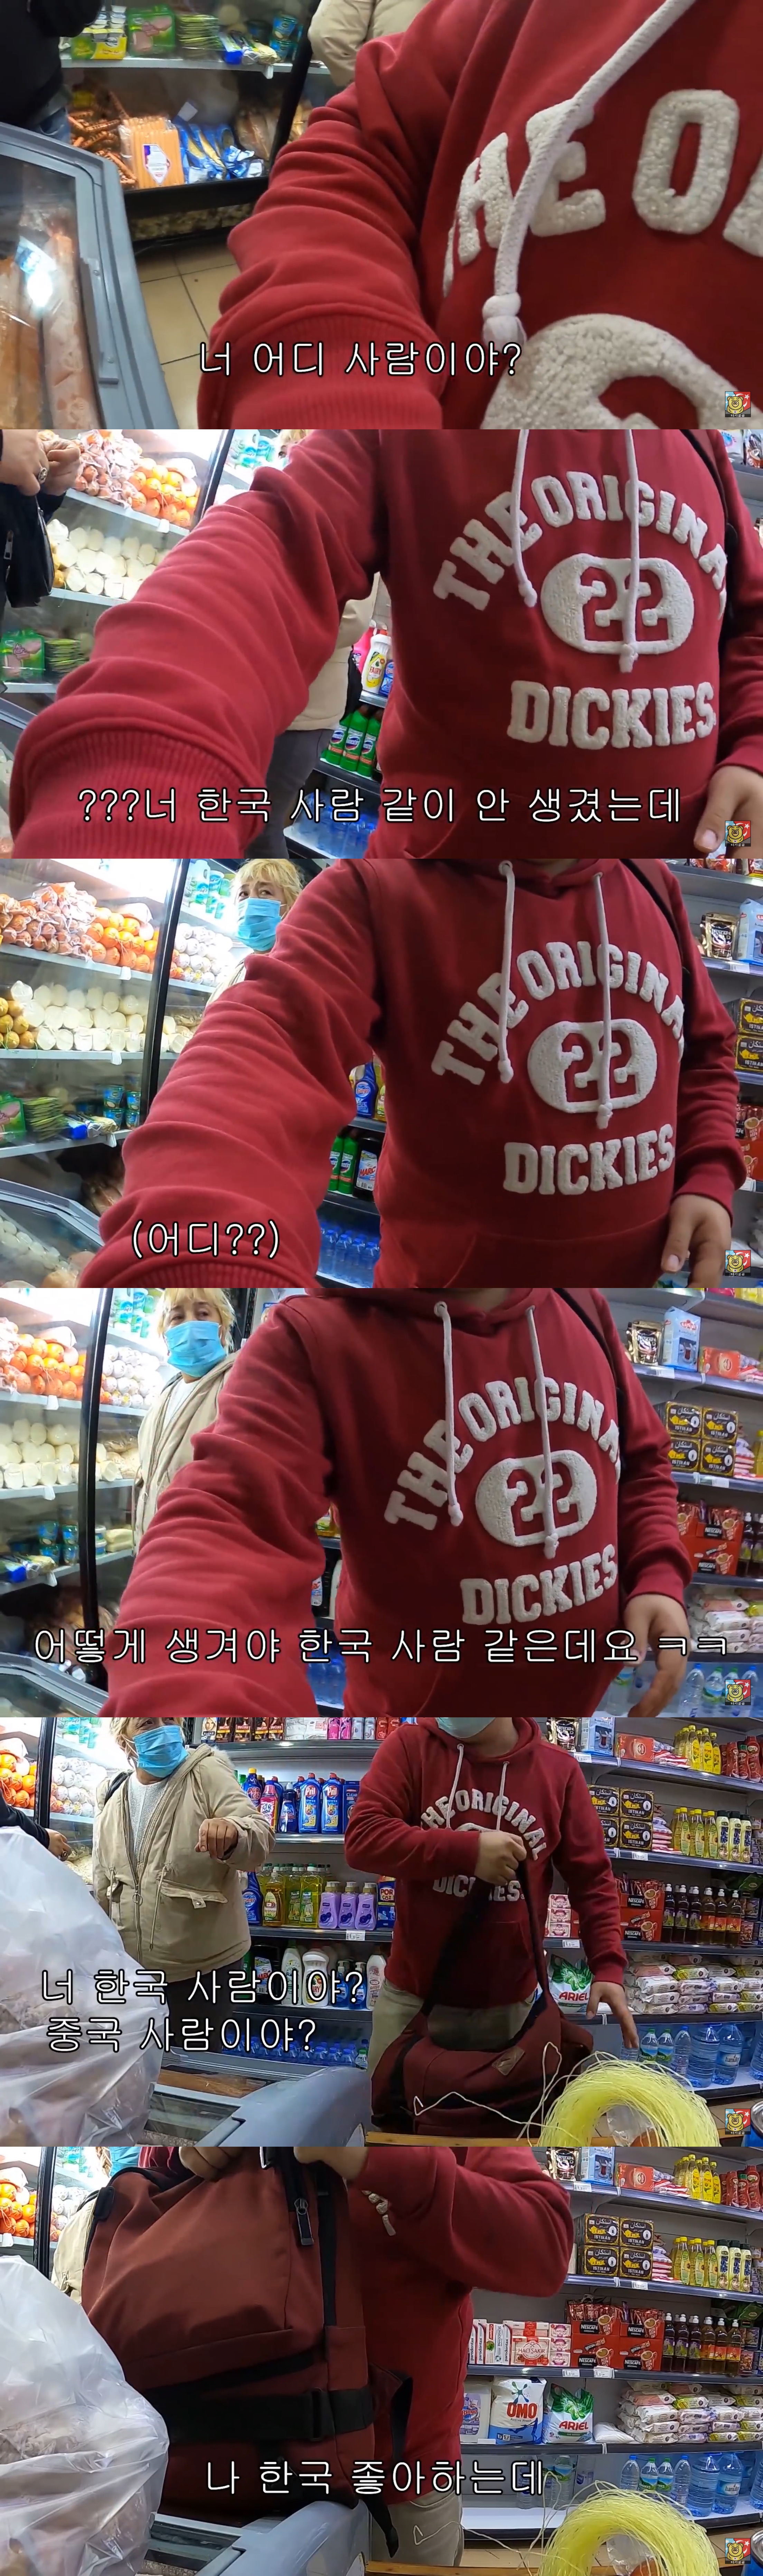 What Koreans should be careful when they are abroad.jpg